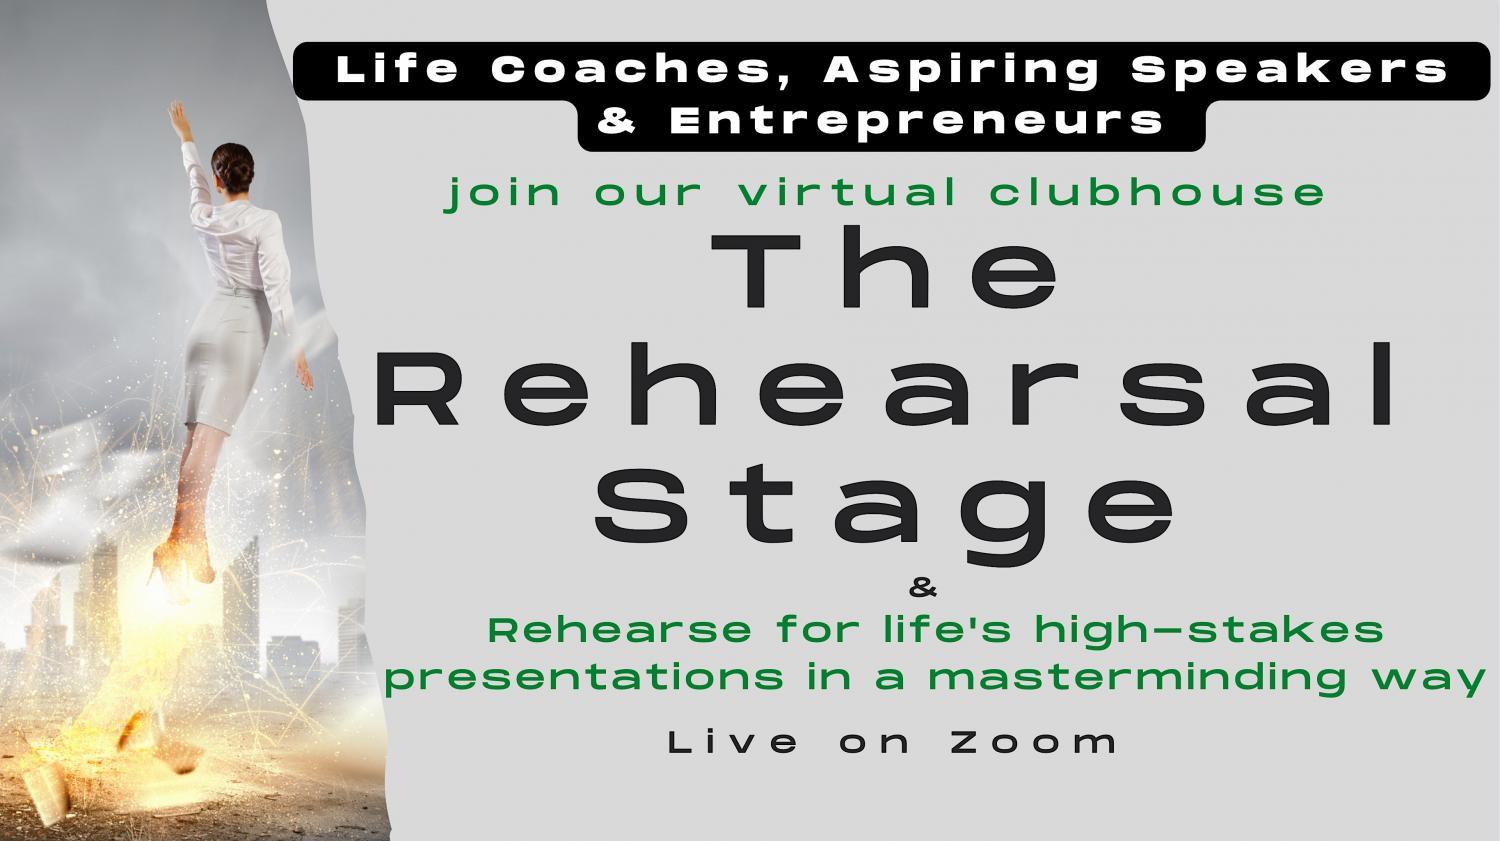 Coaches & Speakers-10x Your Speaking Confidence on The Rehearsal Stage
Tue Jan 3, 12:30 PM - Tue Jan 3, 2:00 PM
in 75 days